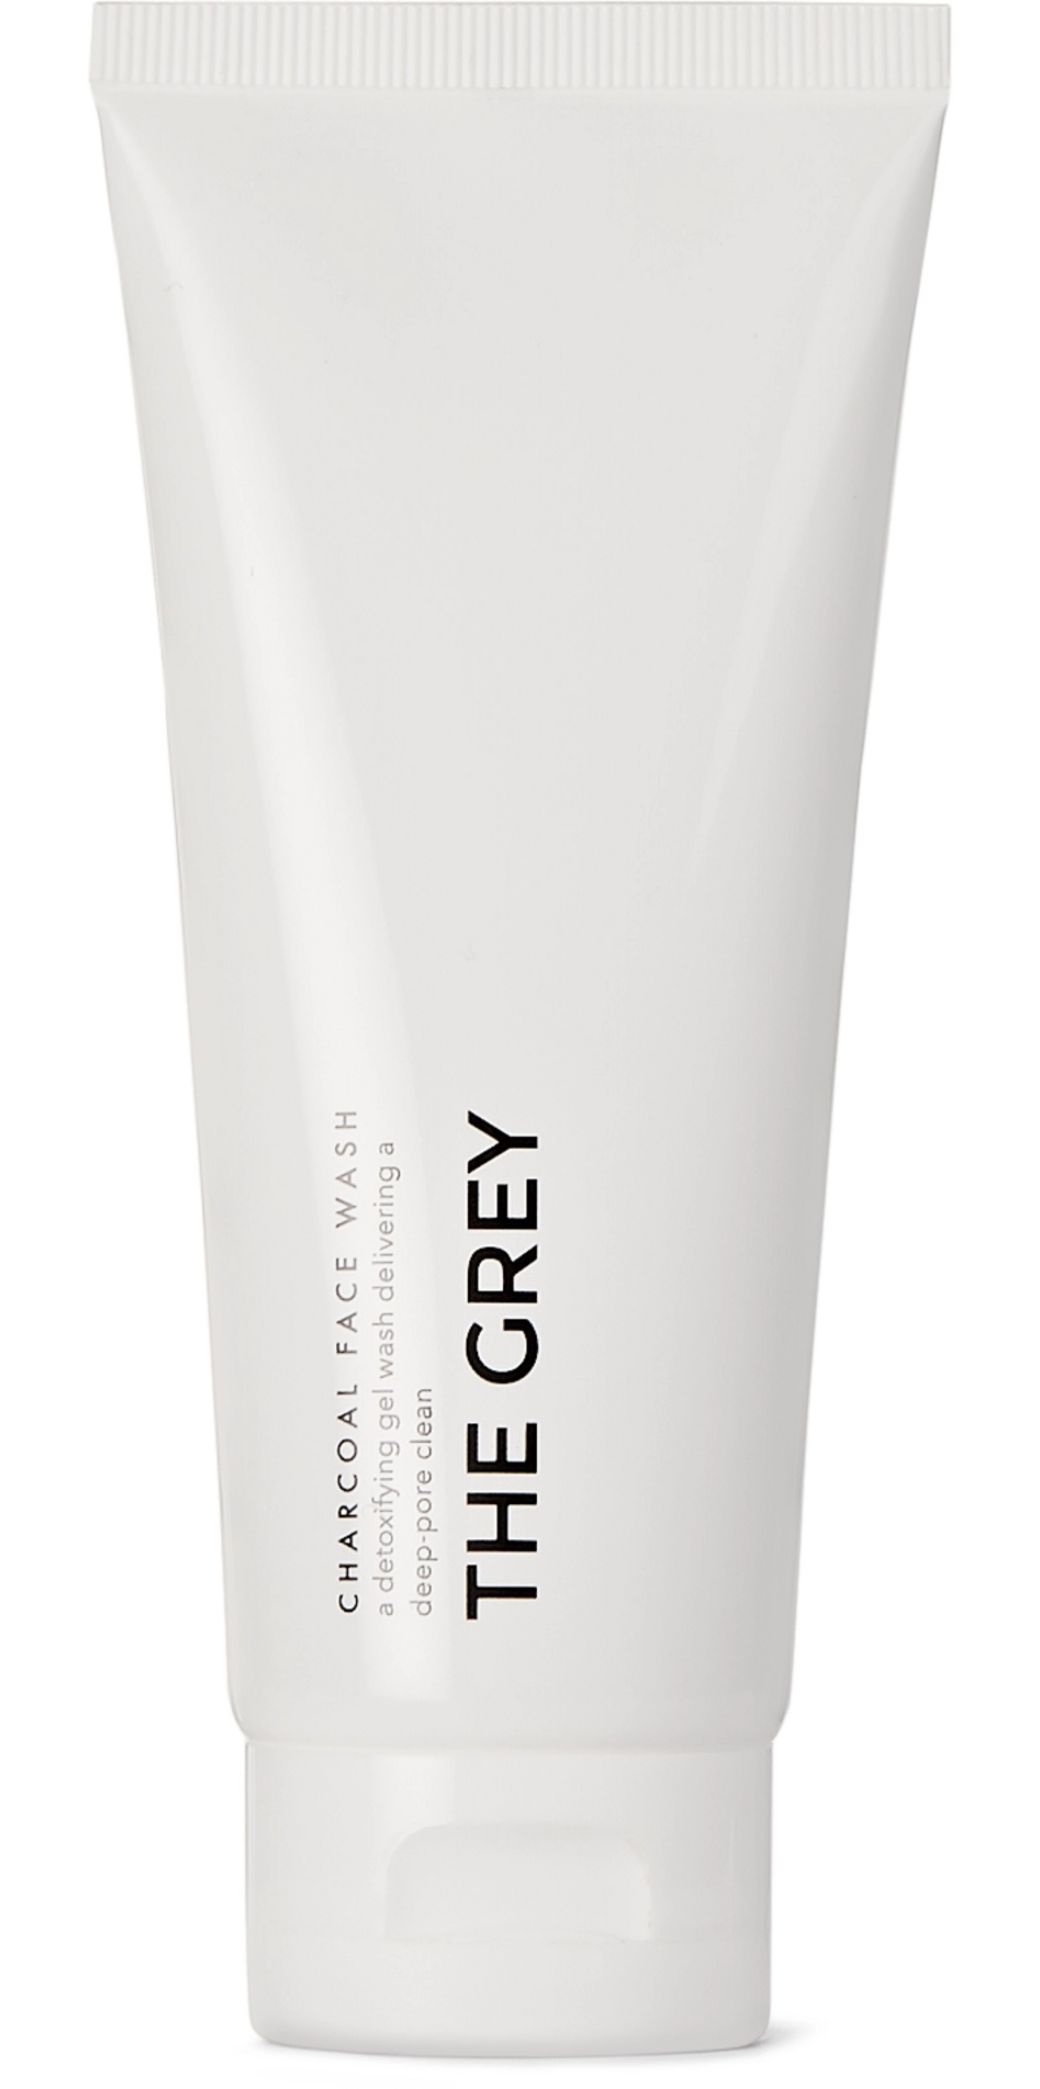 THE GREY MEN'S SKINCARE Charcoal Face Wash